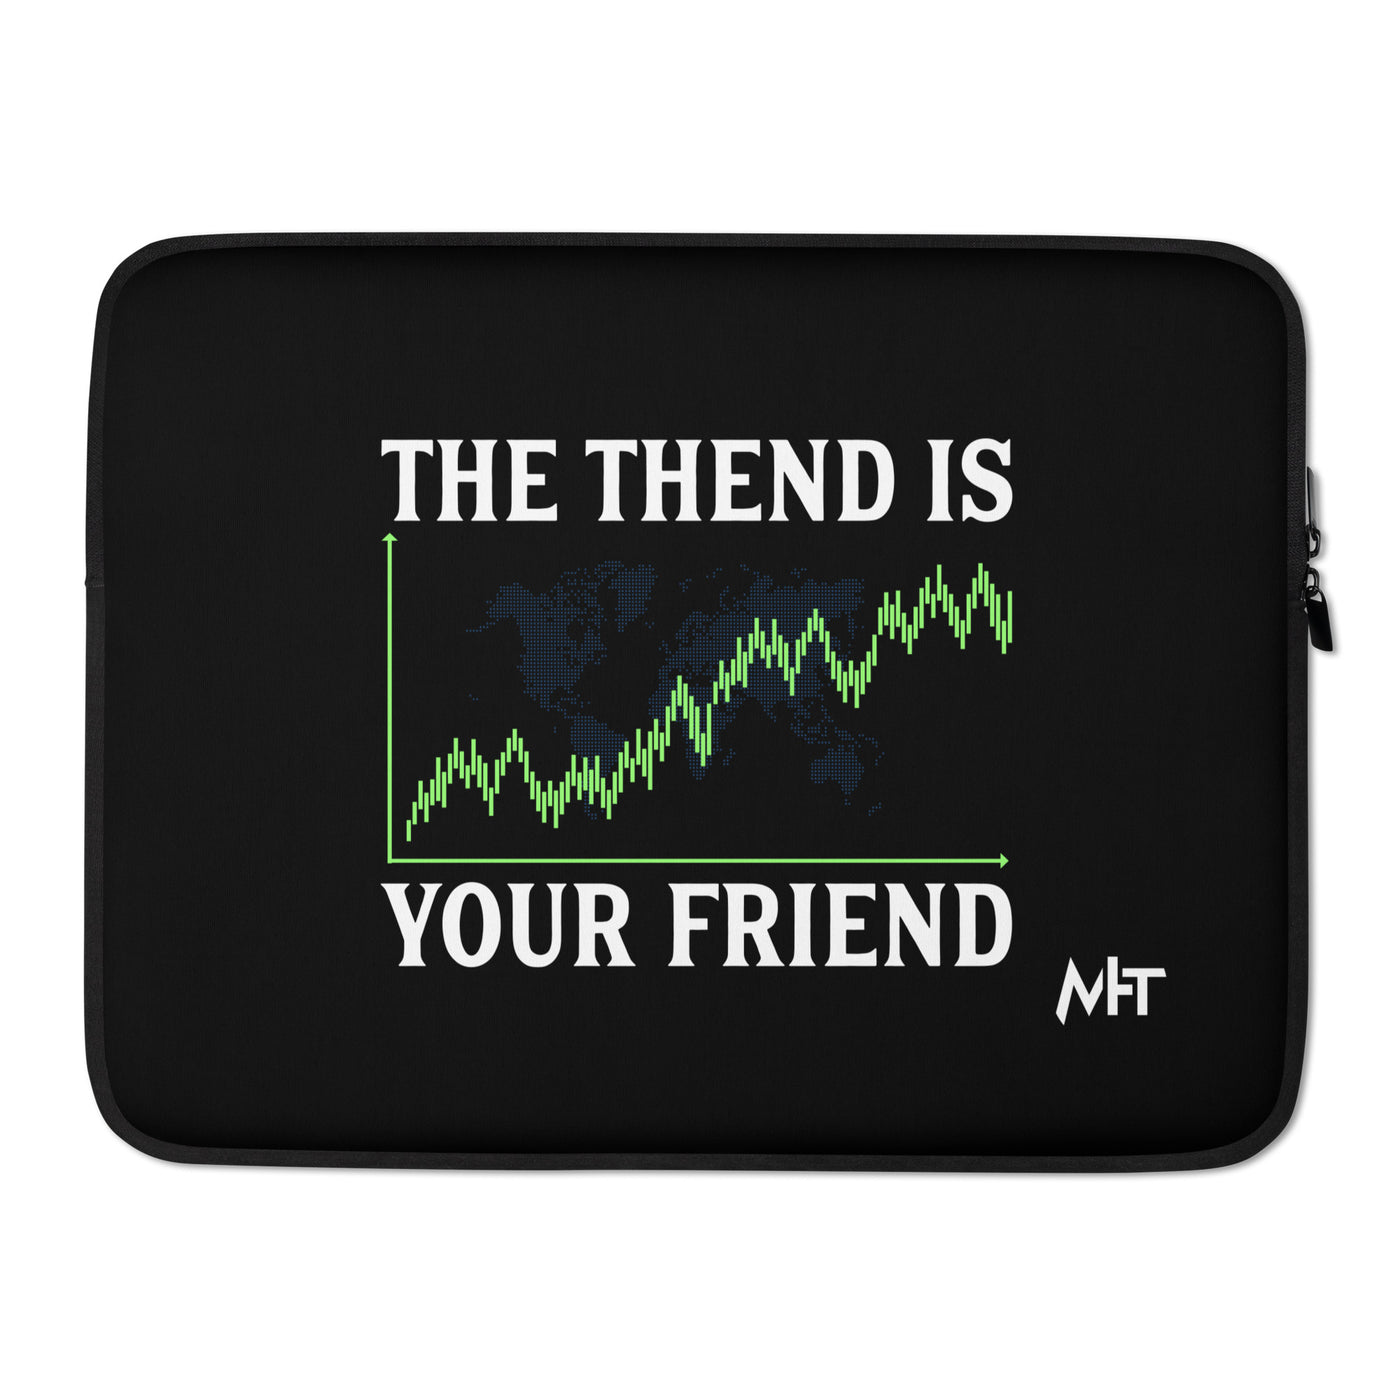 The Trend is your friend - Laptop Sleeve